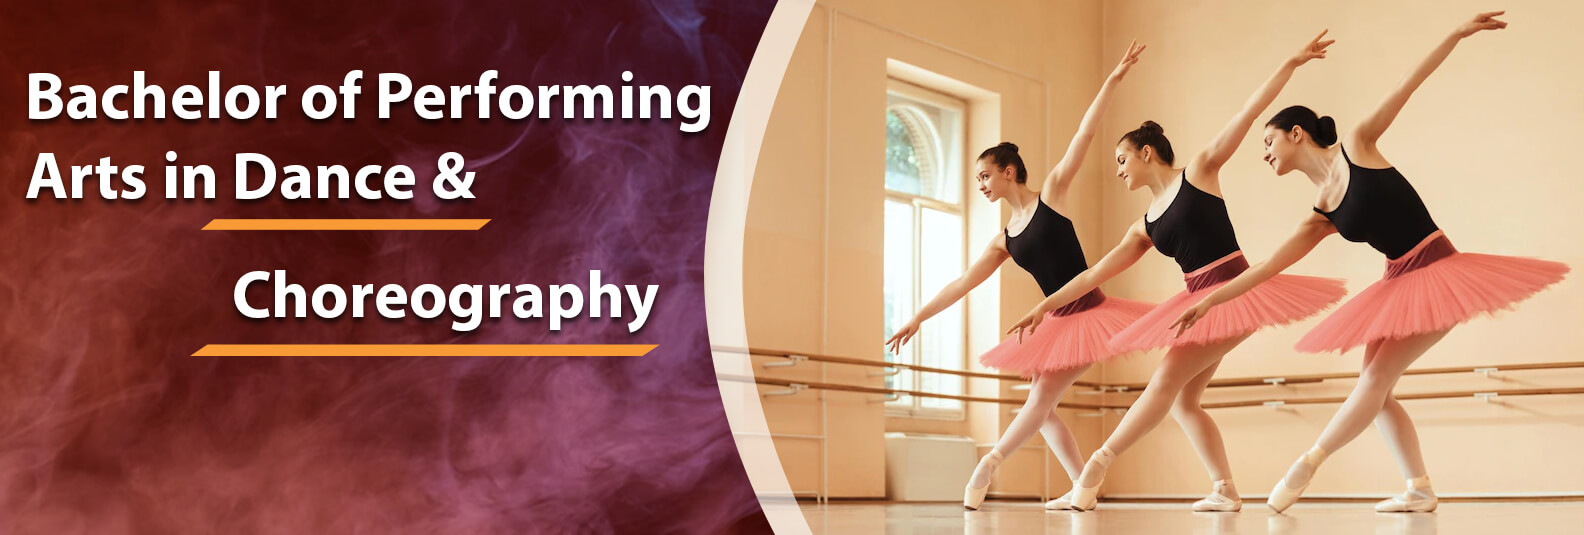 Bachelor of Performing Arts in Dance & Choreography